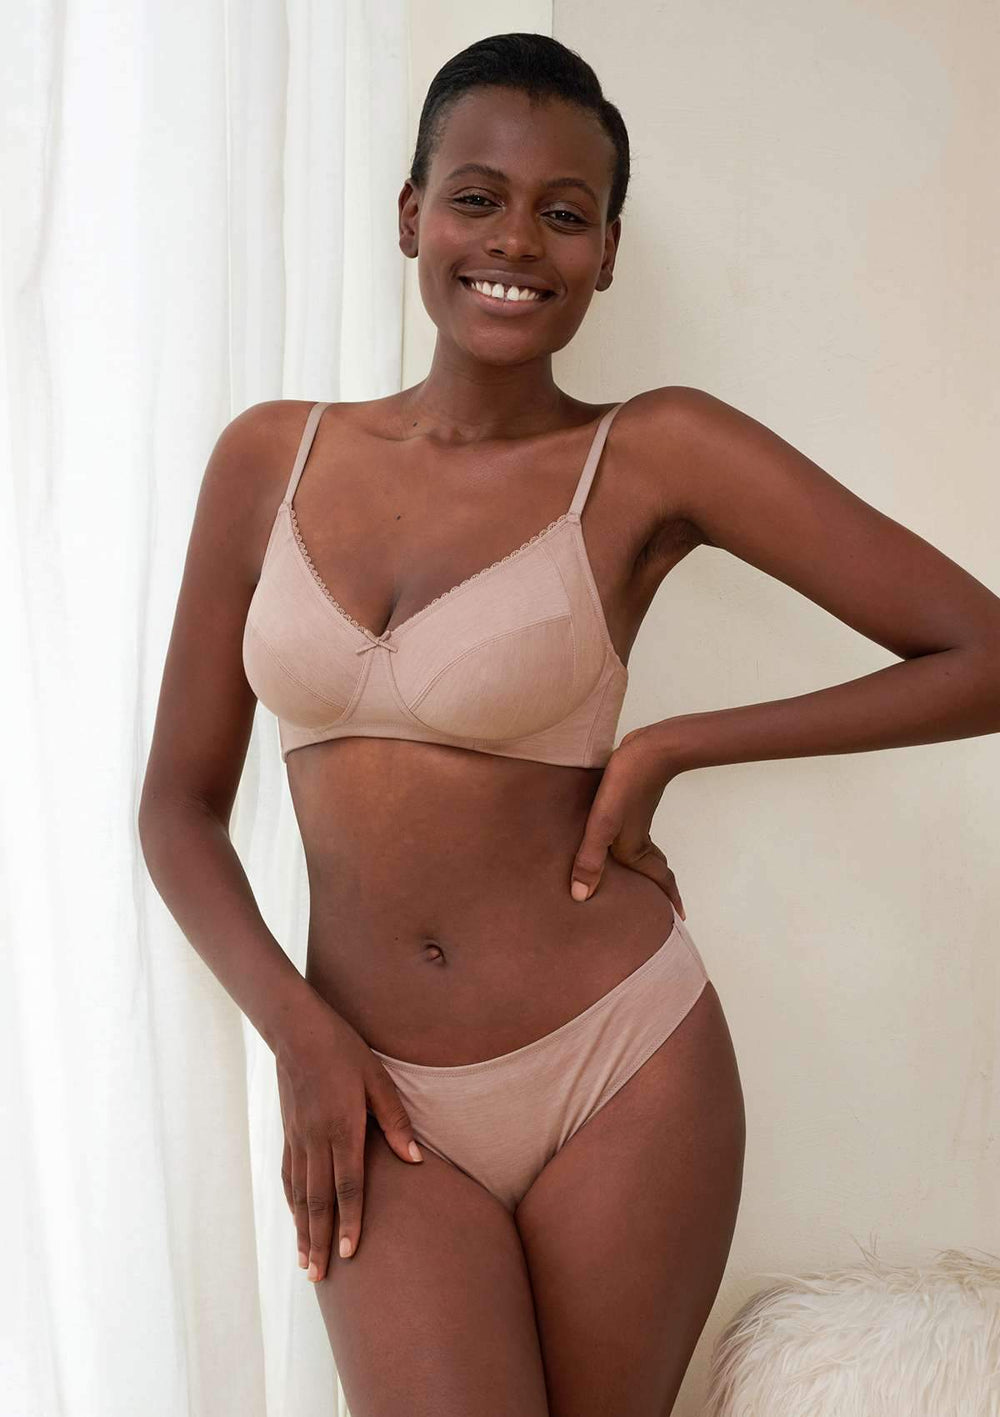 Bras for Sensitive Skin: Choosing Hypoallergenic Options, by Hsia Lingerie